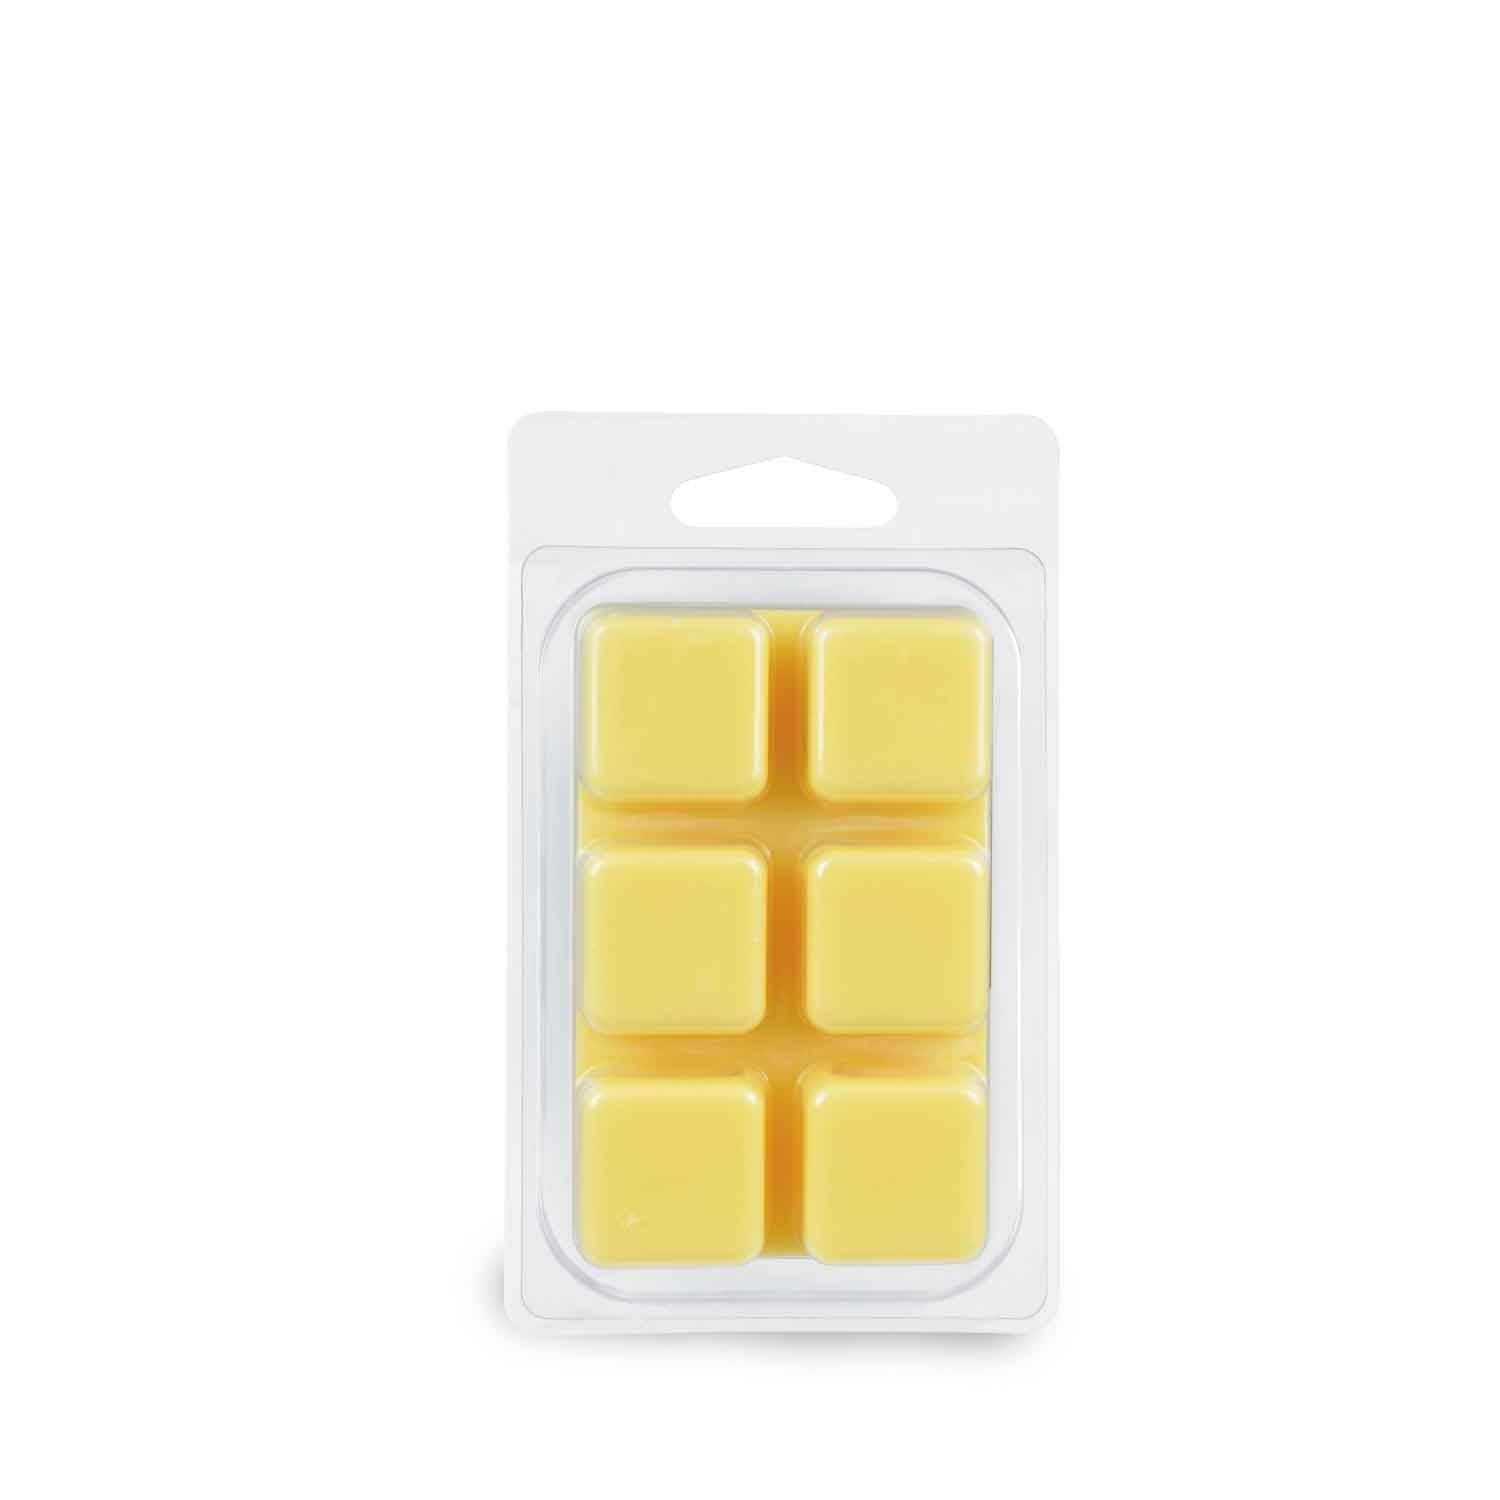 A pack of Pineapple Ginger scented wax cubes on a white background by Tuscany Candle®.